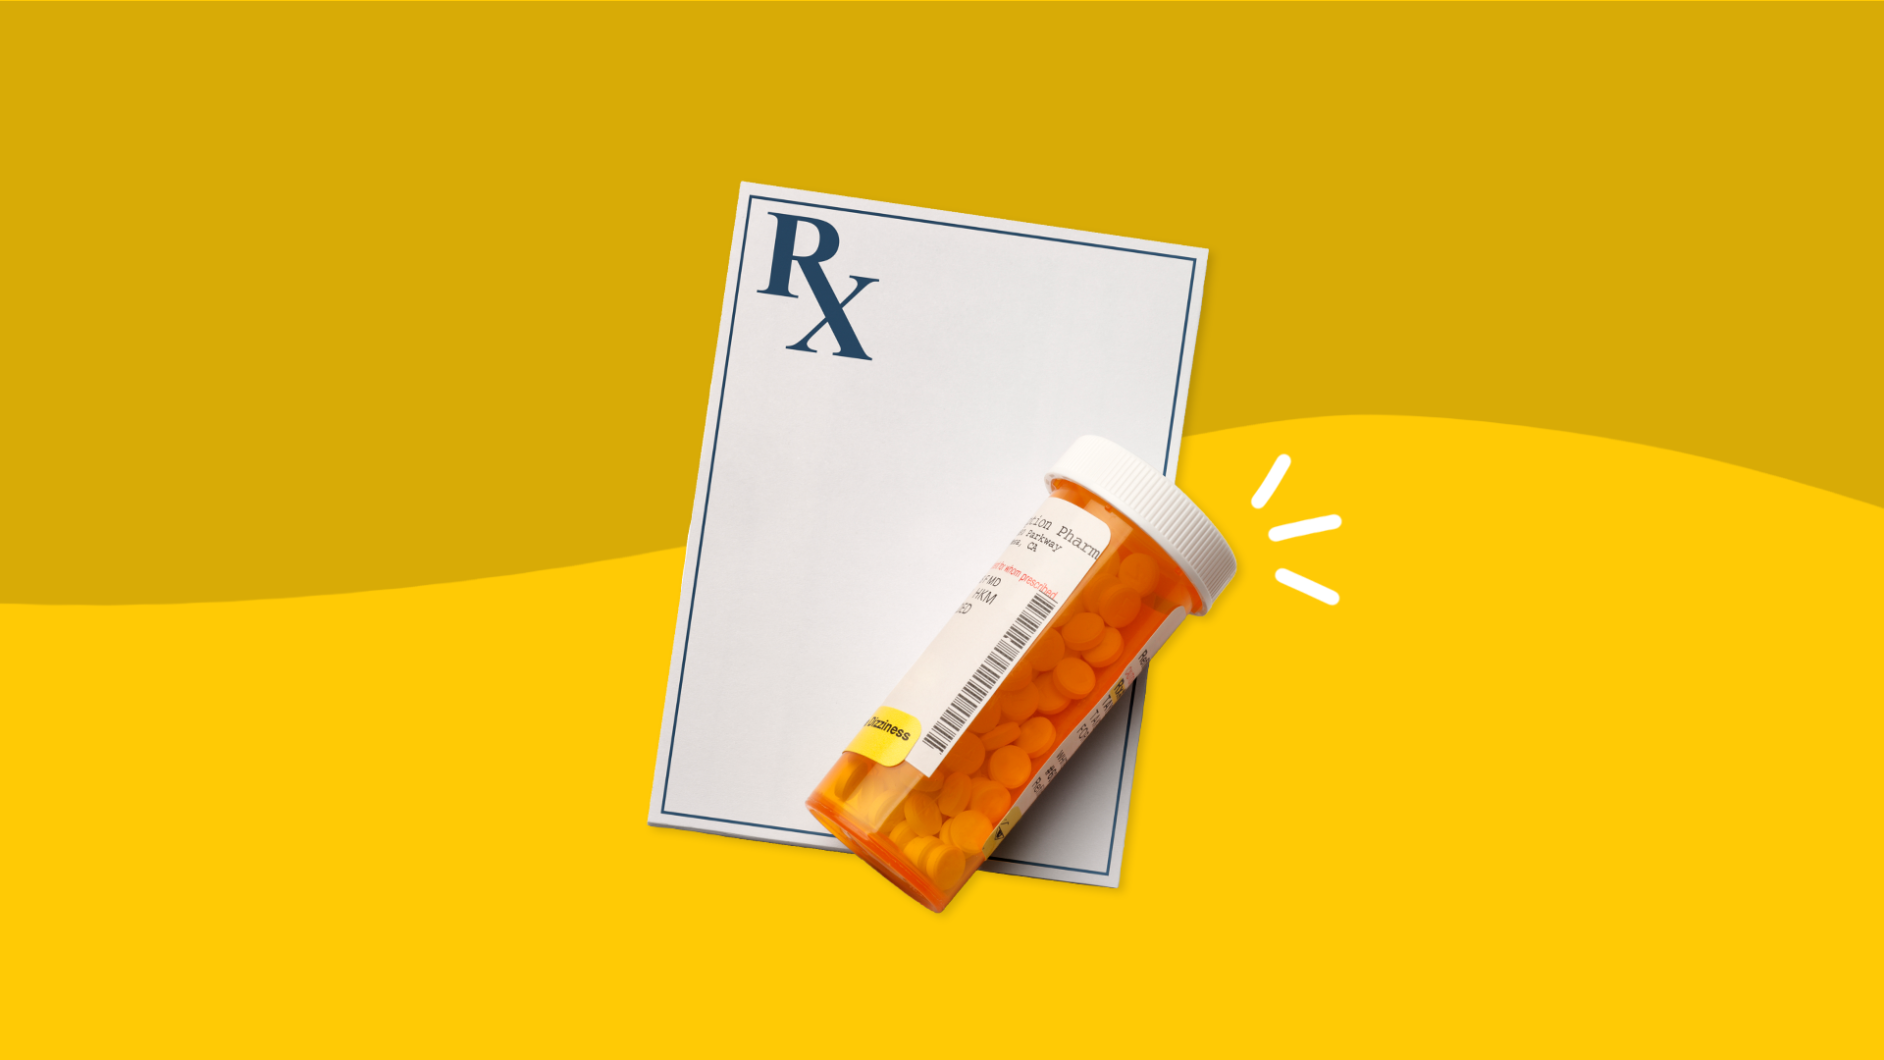 Prescription pad with pill bottle: Common vs. serious Depakote side effects